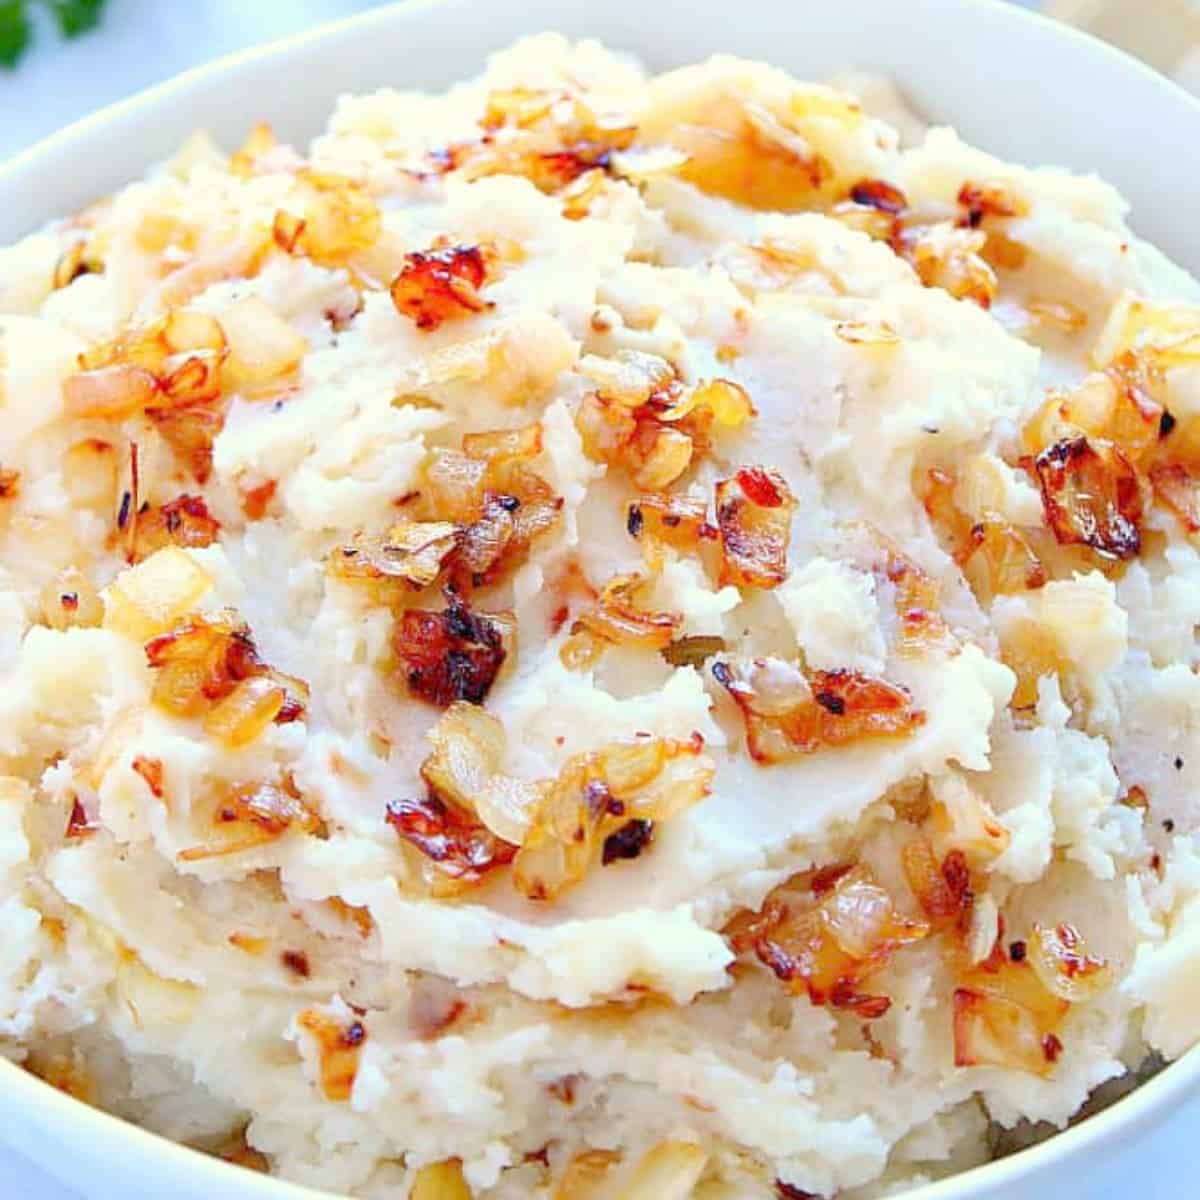 Mashed potatoes with caramelized onions in a bowl.